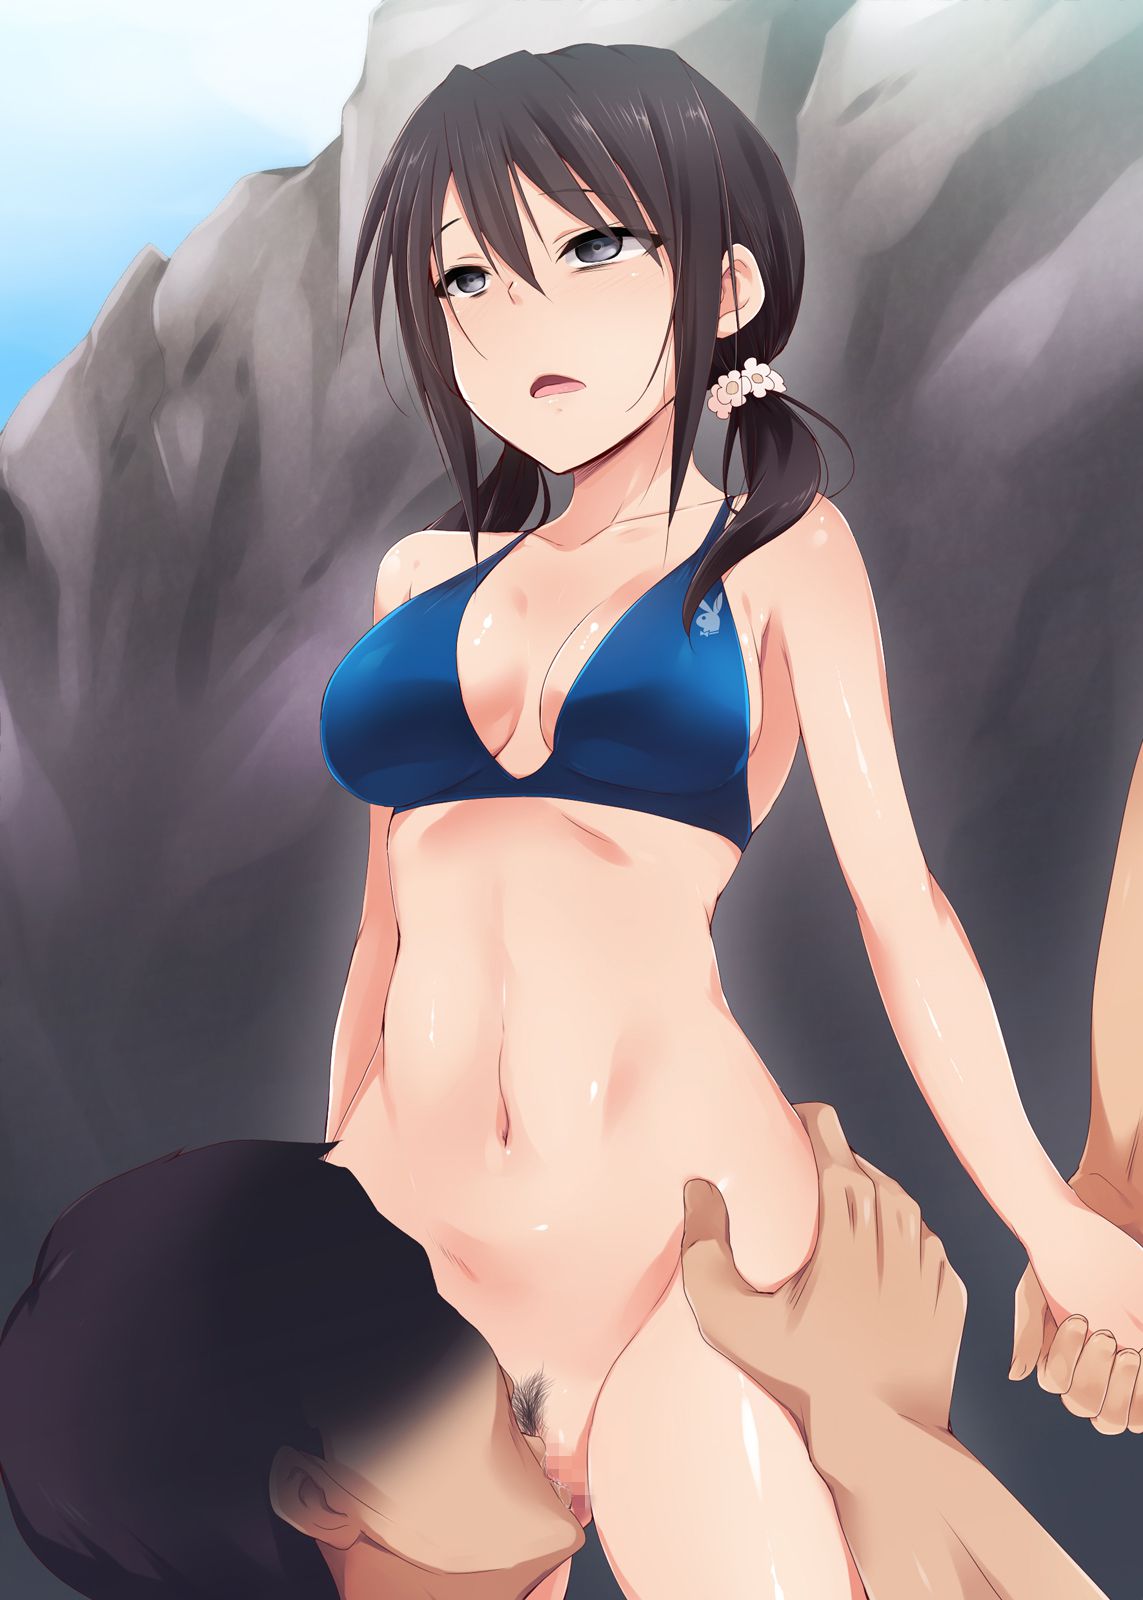 Erotic anime summary erotic image collection of beautiful girls who are feeling [50 pieces] 3